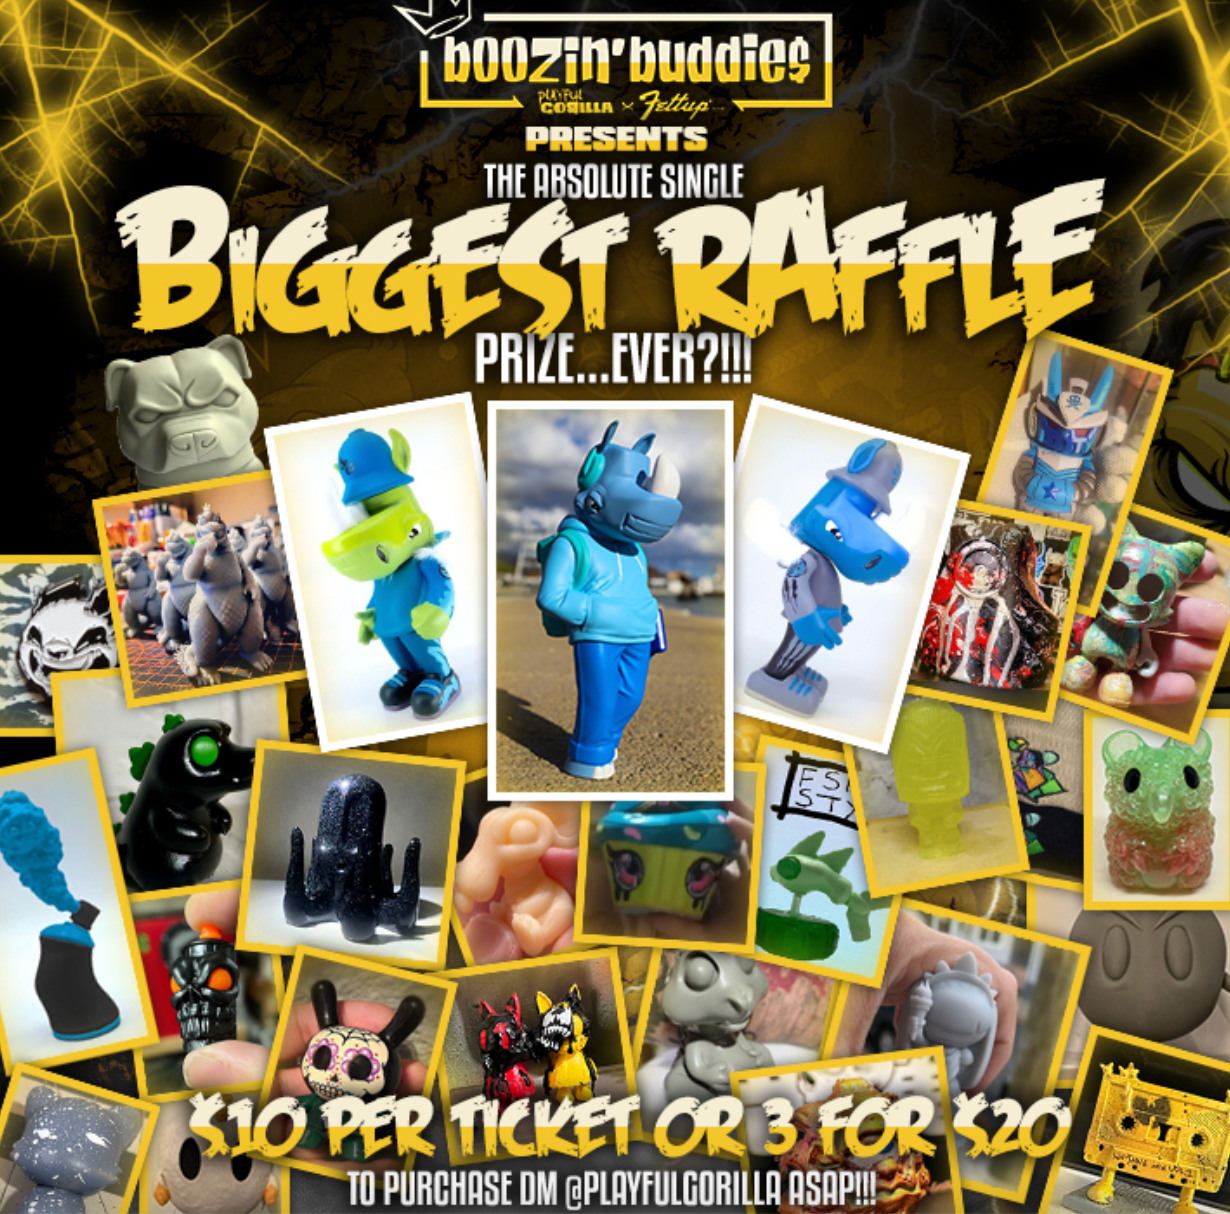 Boozin’Buddie$  Presents: The Absolute BIGGEST RAFFLE Prize Ever!